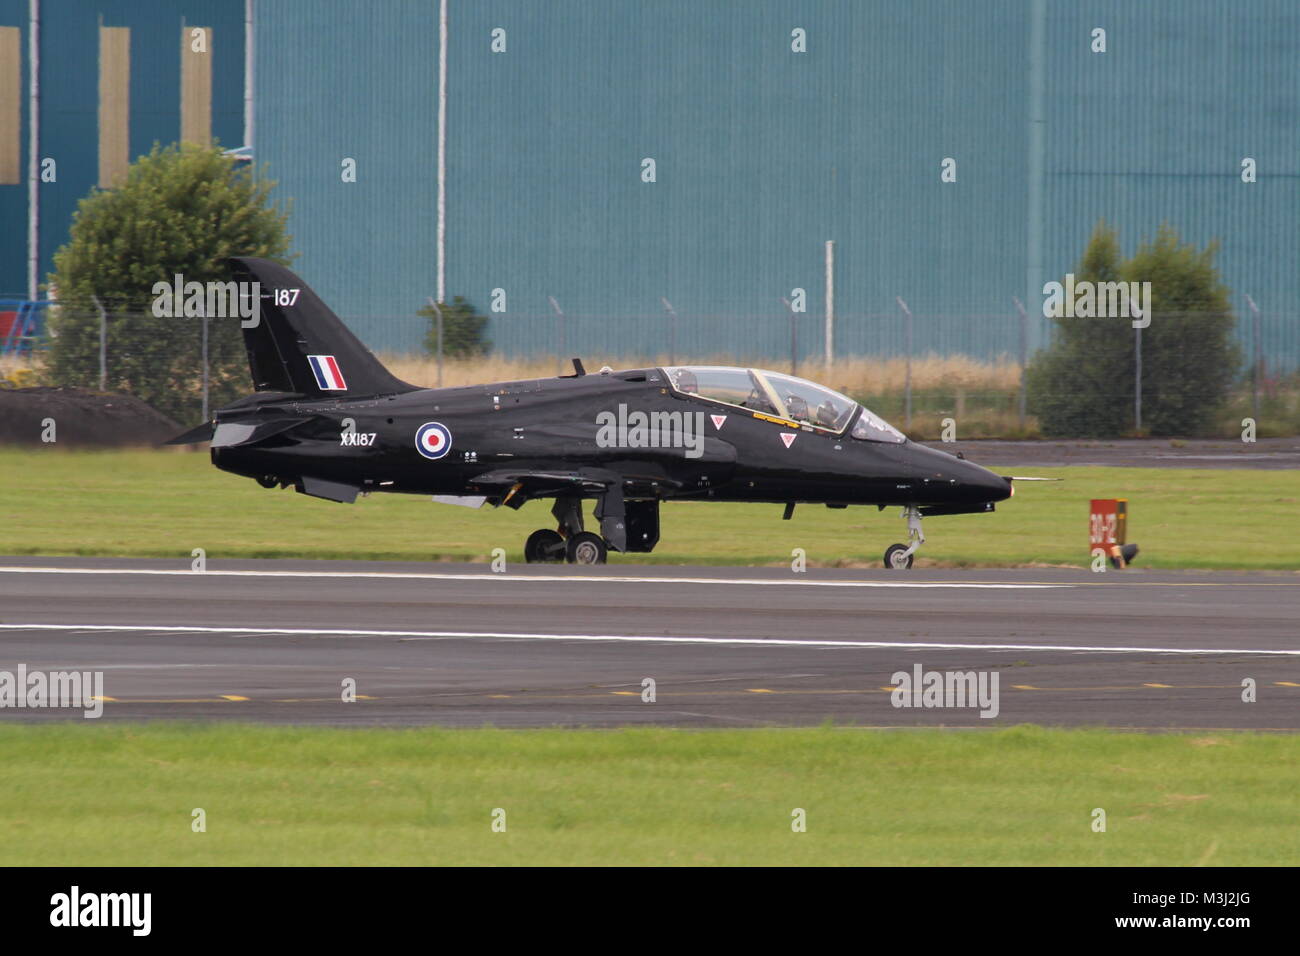 XX187 a BAe Hawk T1A operated by the Royal Navy, at Prestwick Airport during Exercise Saxon Warrior 2017. Stock Photo